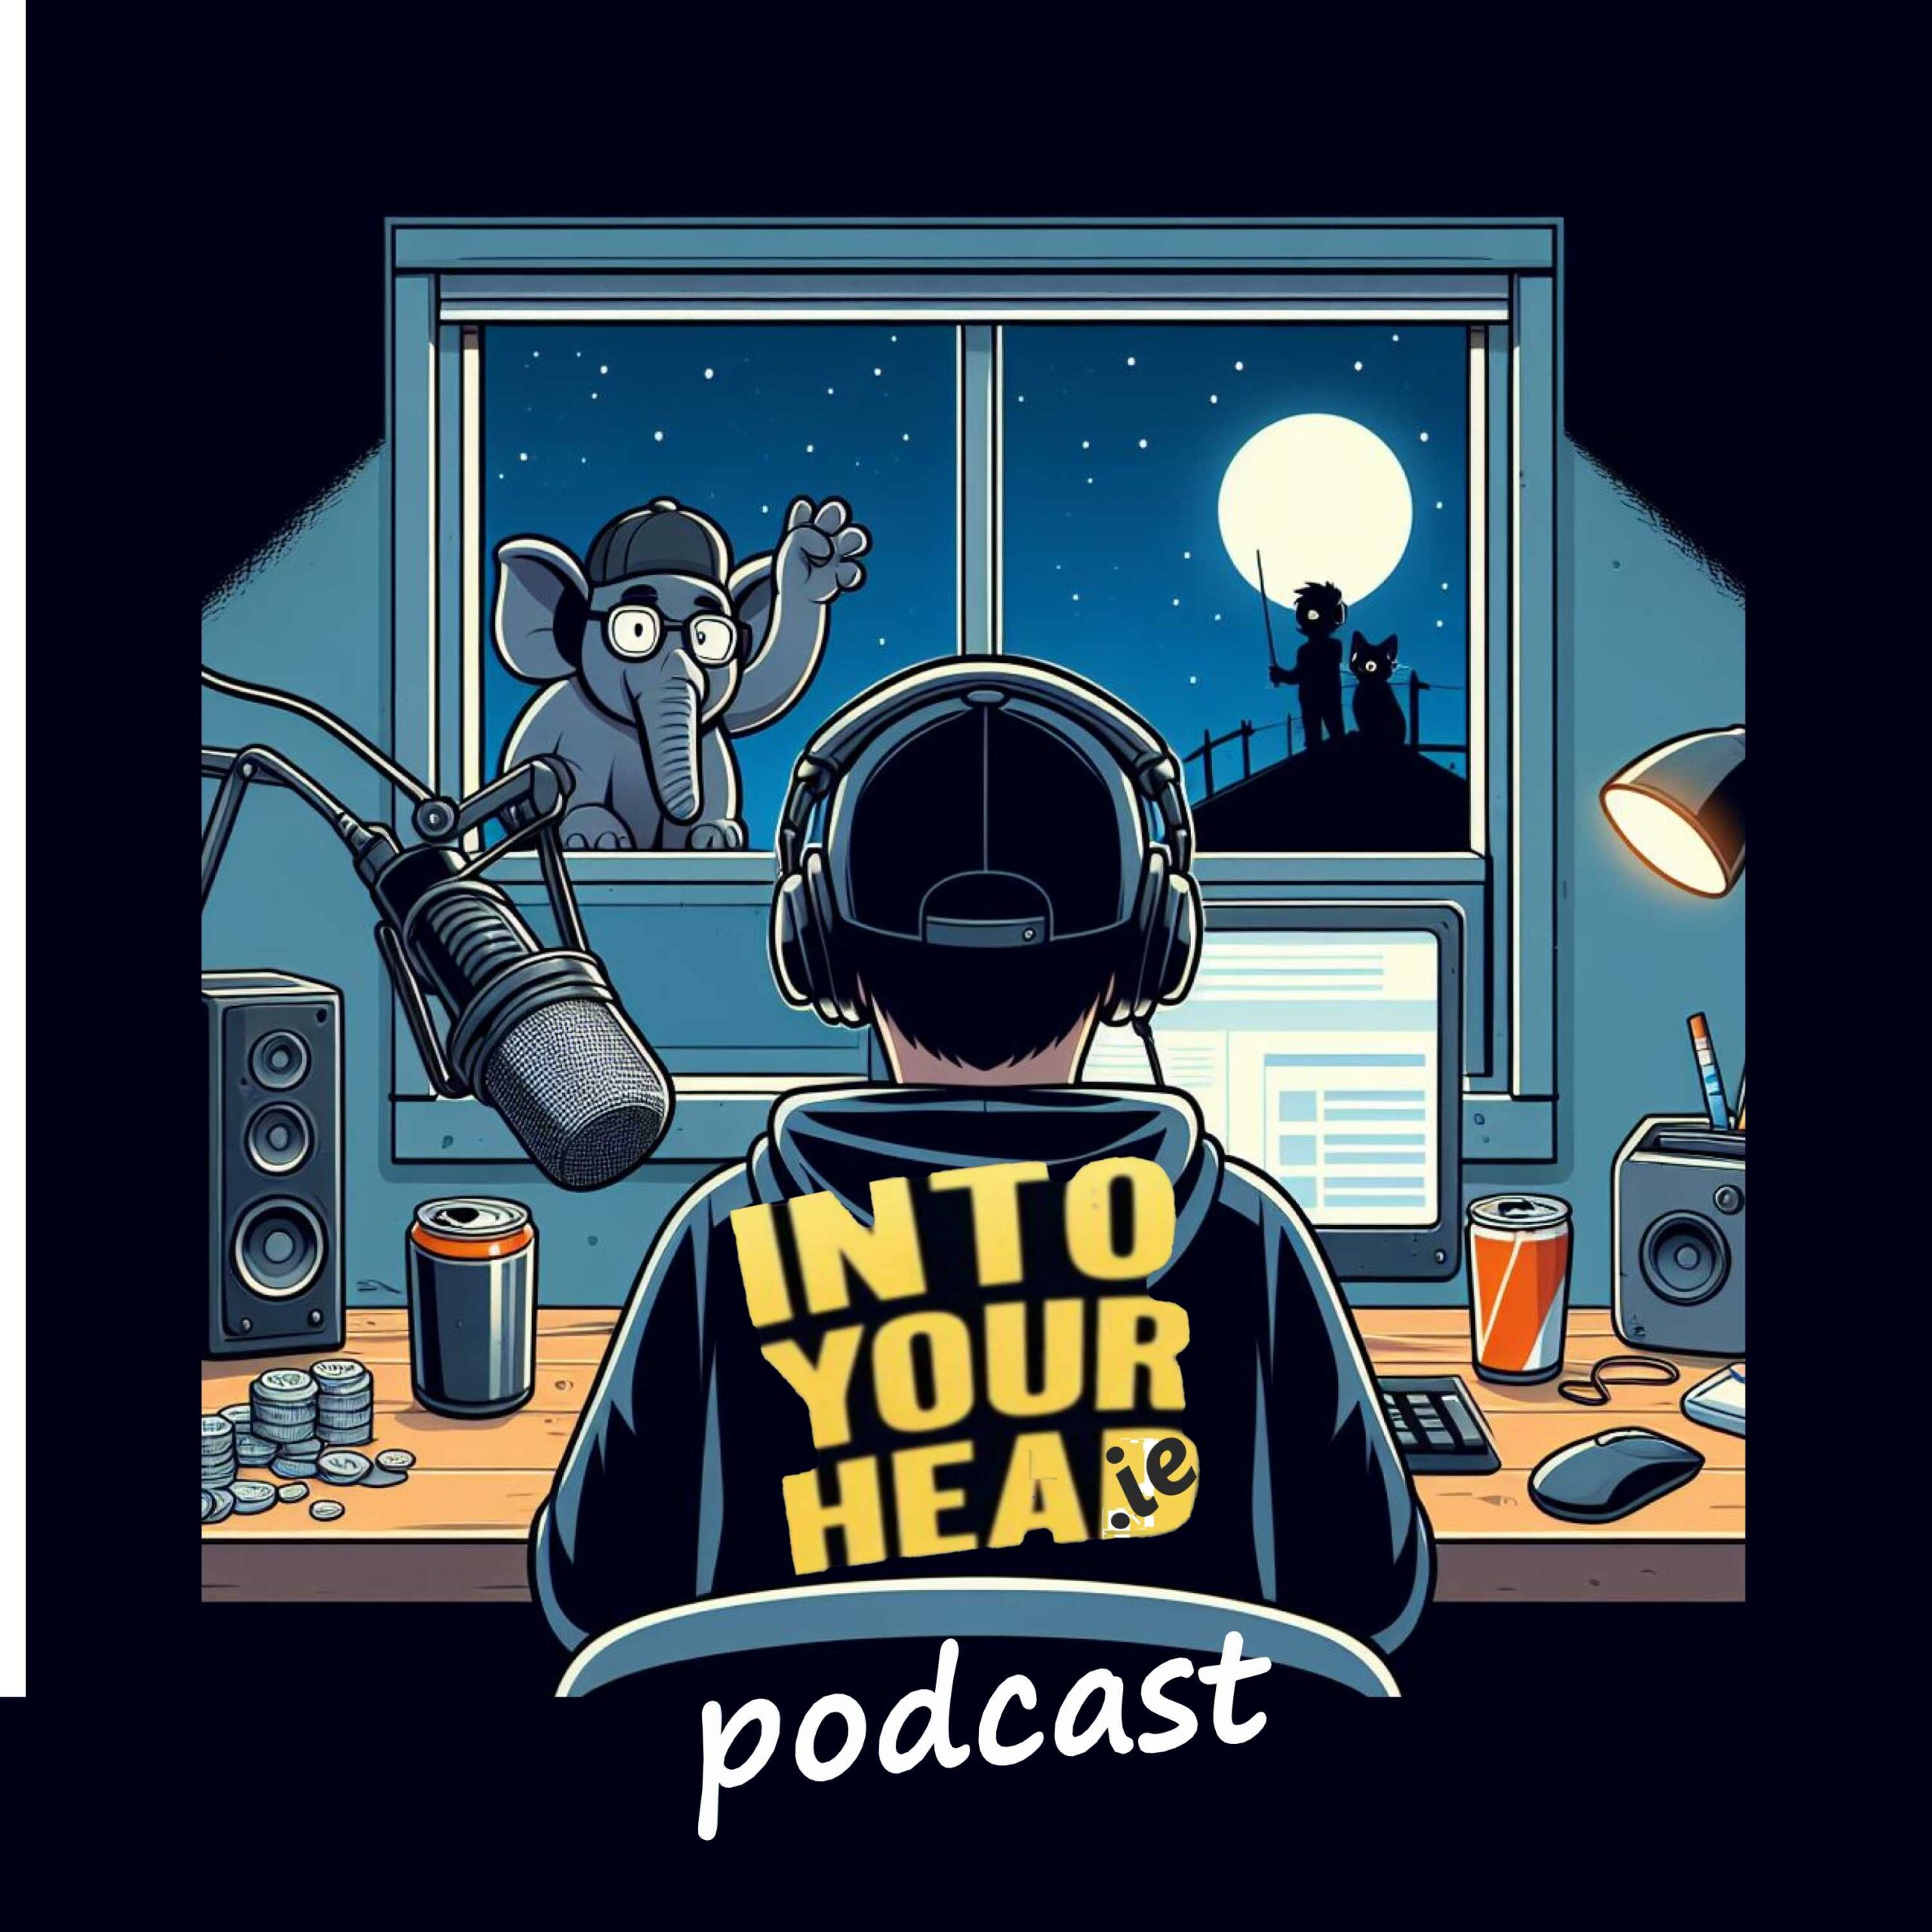 Click here for Into Your Head podcast at IntoYourHead.ie